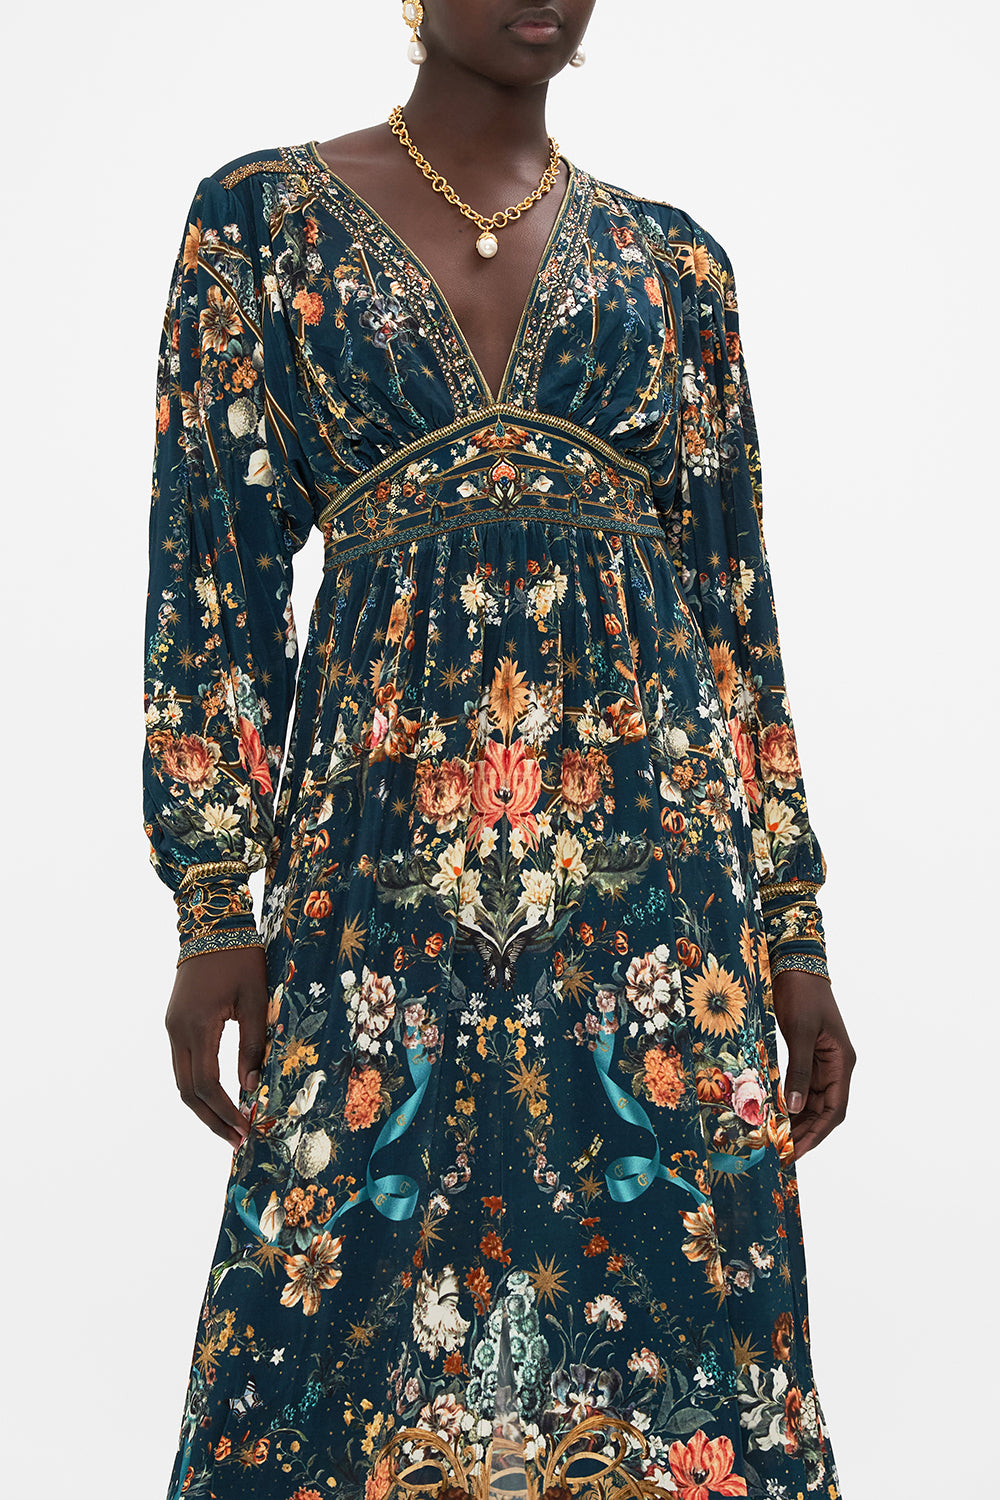 Camilla jersey dress in She Who Wears The Crown print